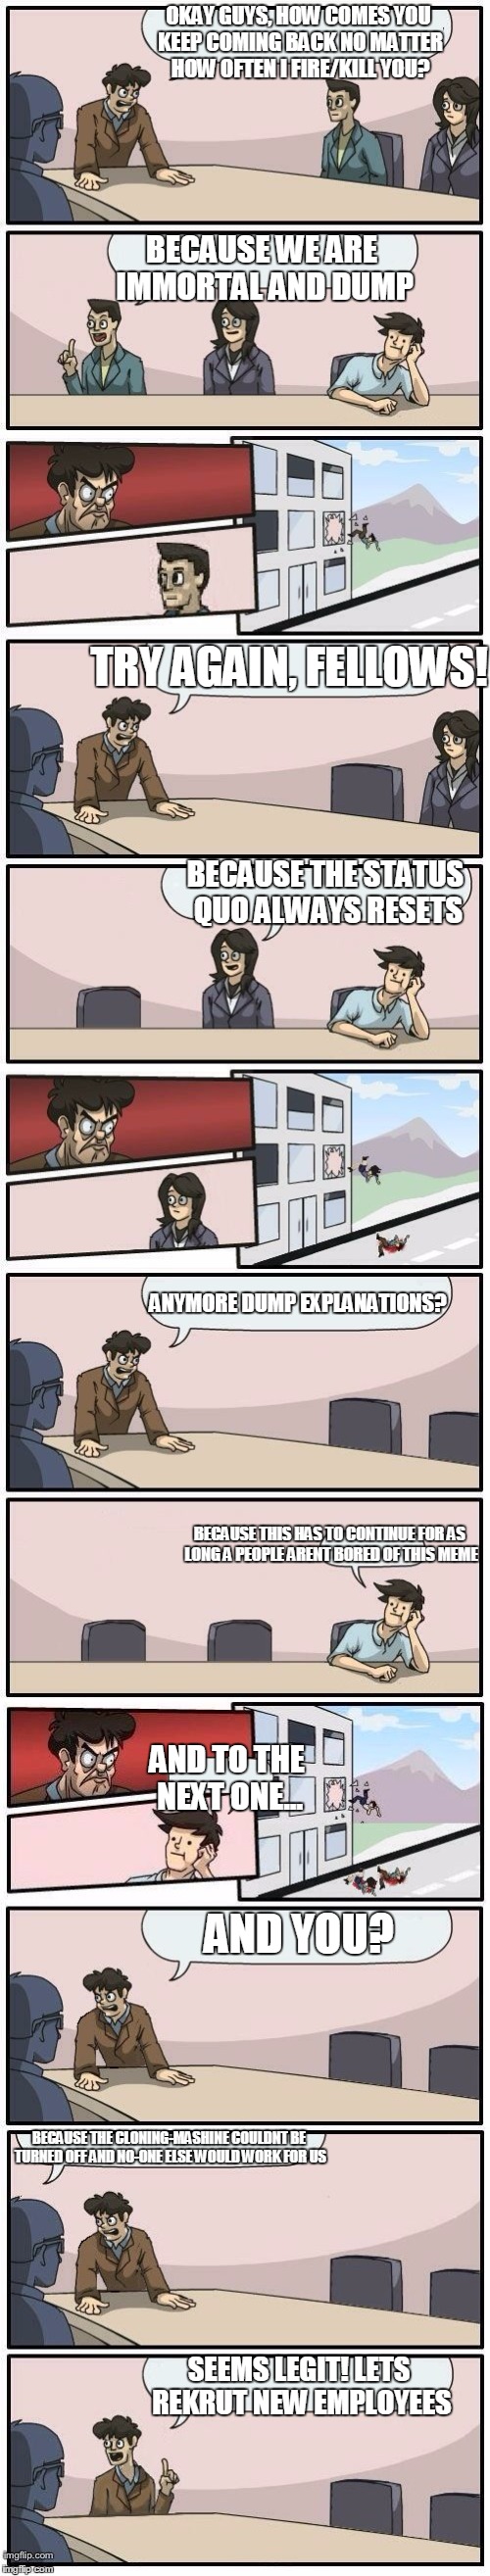 Boardroom Meeting Suggestions Extended | OKAY GUYS, HOW COMES YOU KEEP COMING BACK NO MATTER HOW OFTEN I FIRE/KILL YOU? BECAUSE WE ARE IMMORTAL AND DUMP; TRY AGAIN, FELLOWS! BECAUSE THE STATUS QUO ALWAYS RESETS; ANYMORE DUMP EXPLANATIONS? BECAUSE THIS HAS TO CONTINUE FOR AS LONG A PEOPLE ARENT BORED OF THIS MEME; AND TO THE NEXT ONE... AND YOU? BECAUSE THE CLONING-MASHINE COULDNT BE TURNED OFF AND NO-ONE ELSE WOULD WORK FOR US; SEEMS LEGIT! LETS REKRUT NEW EMPLOYEES | image tagged in boardroom meeting suggestions extended,memes | made w/ Imgflip meme maker